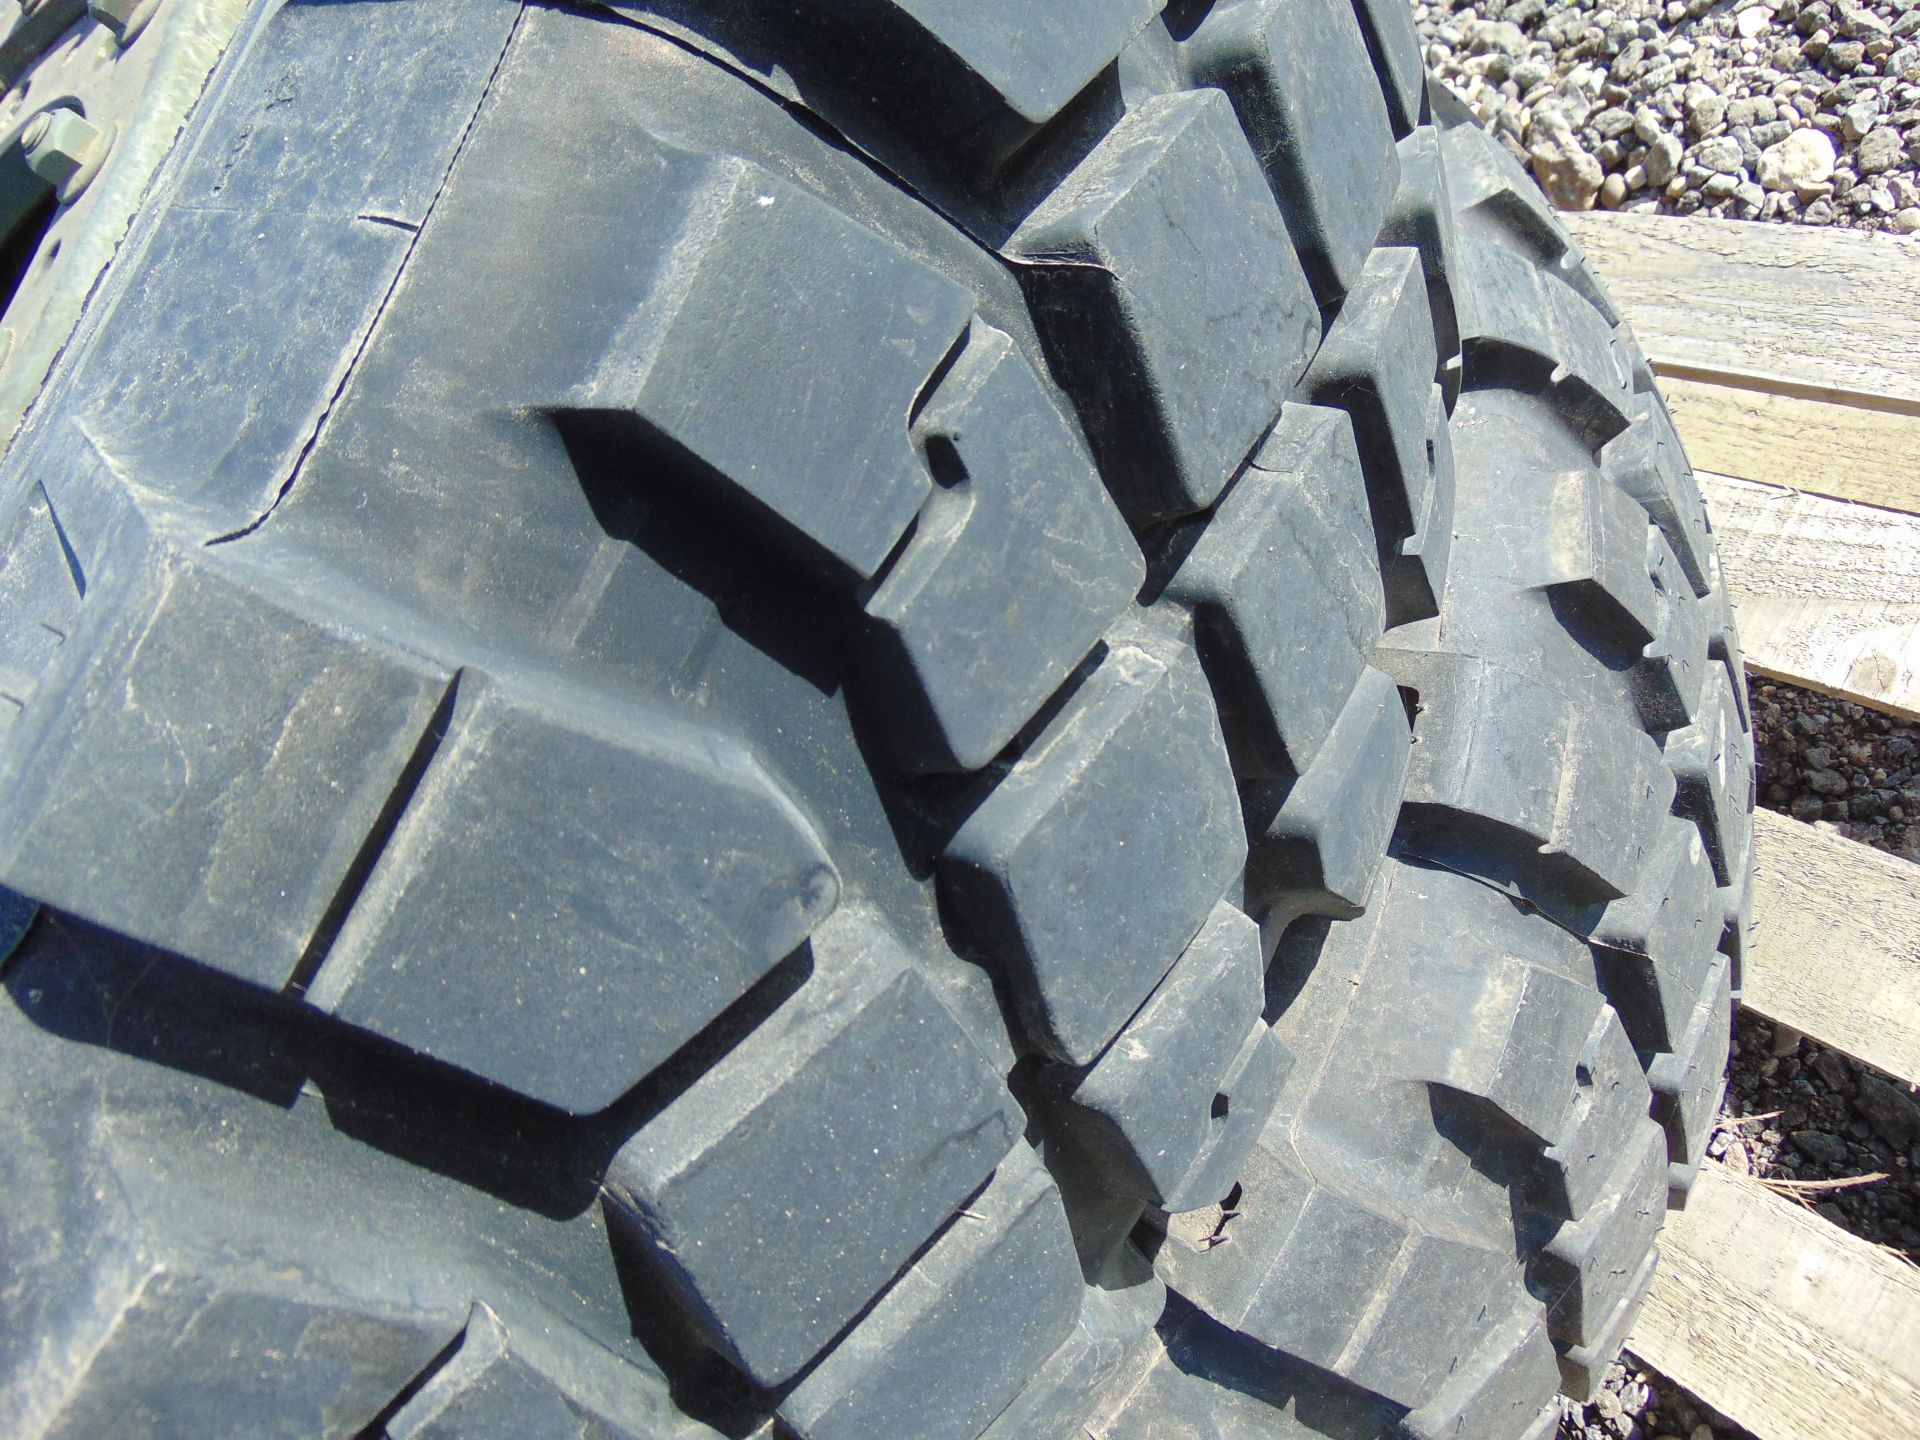 2 x Michelin 325/85 R16 XML Tyres with 8 Stud Rims - Image 3 of 6